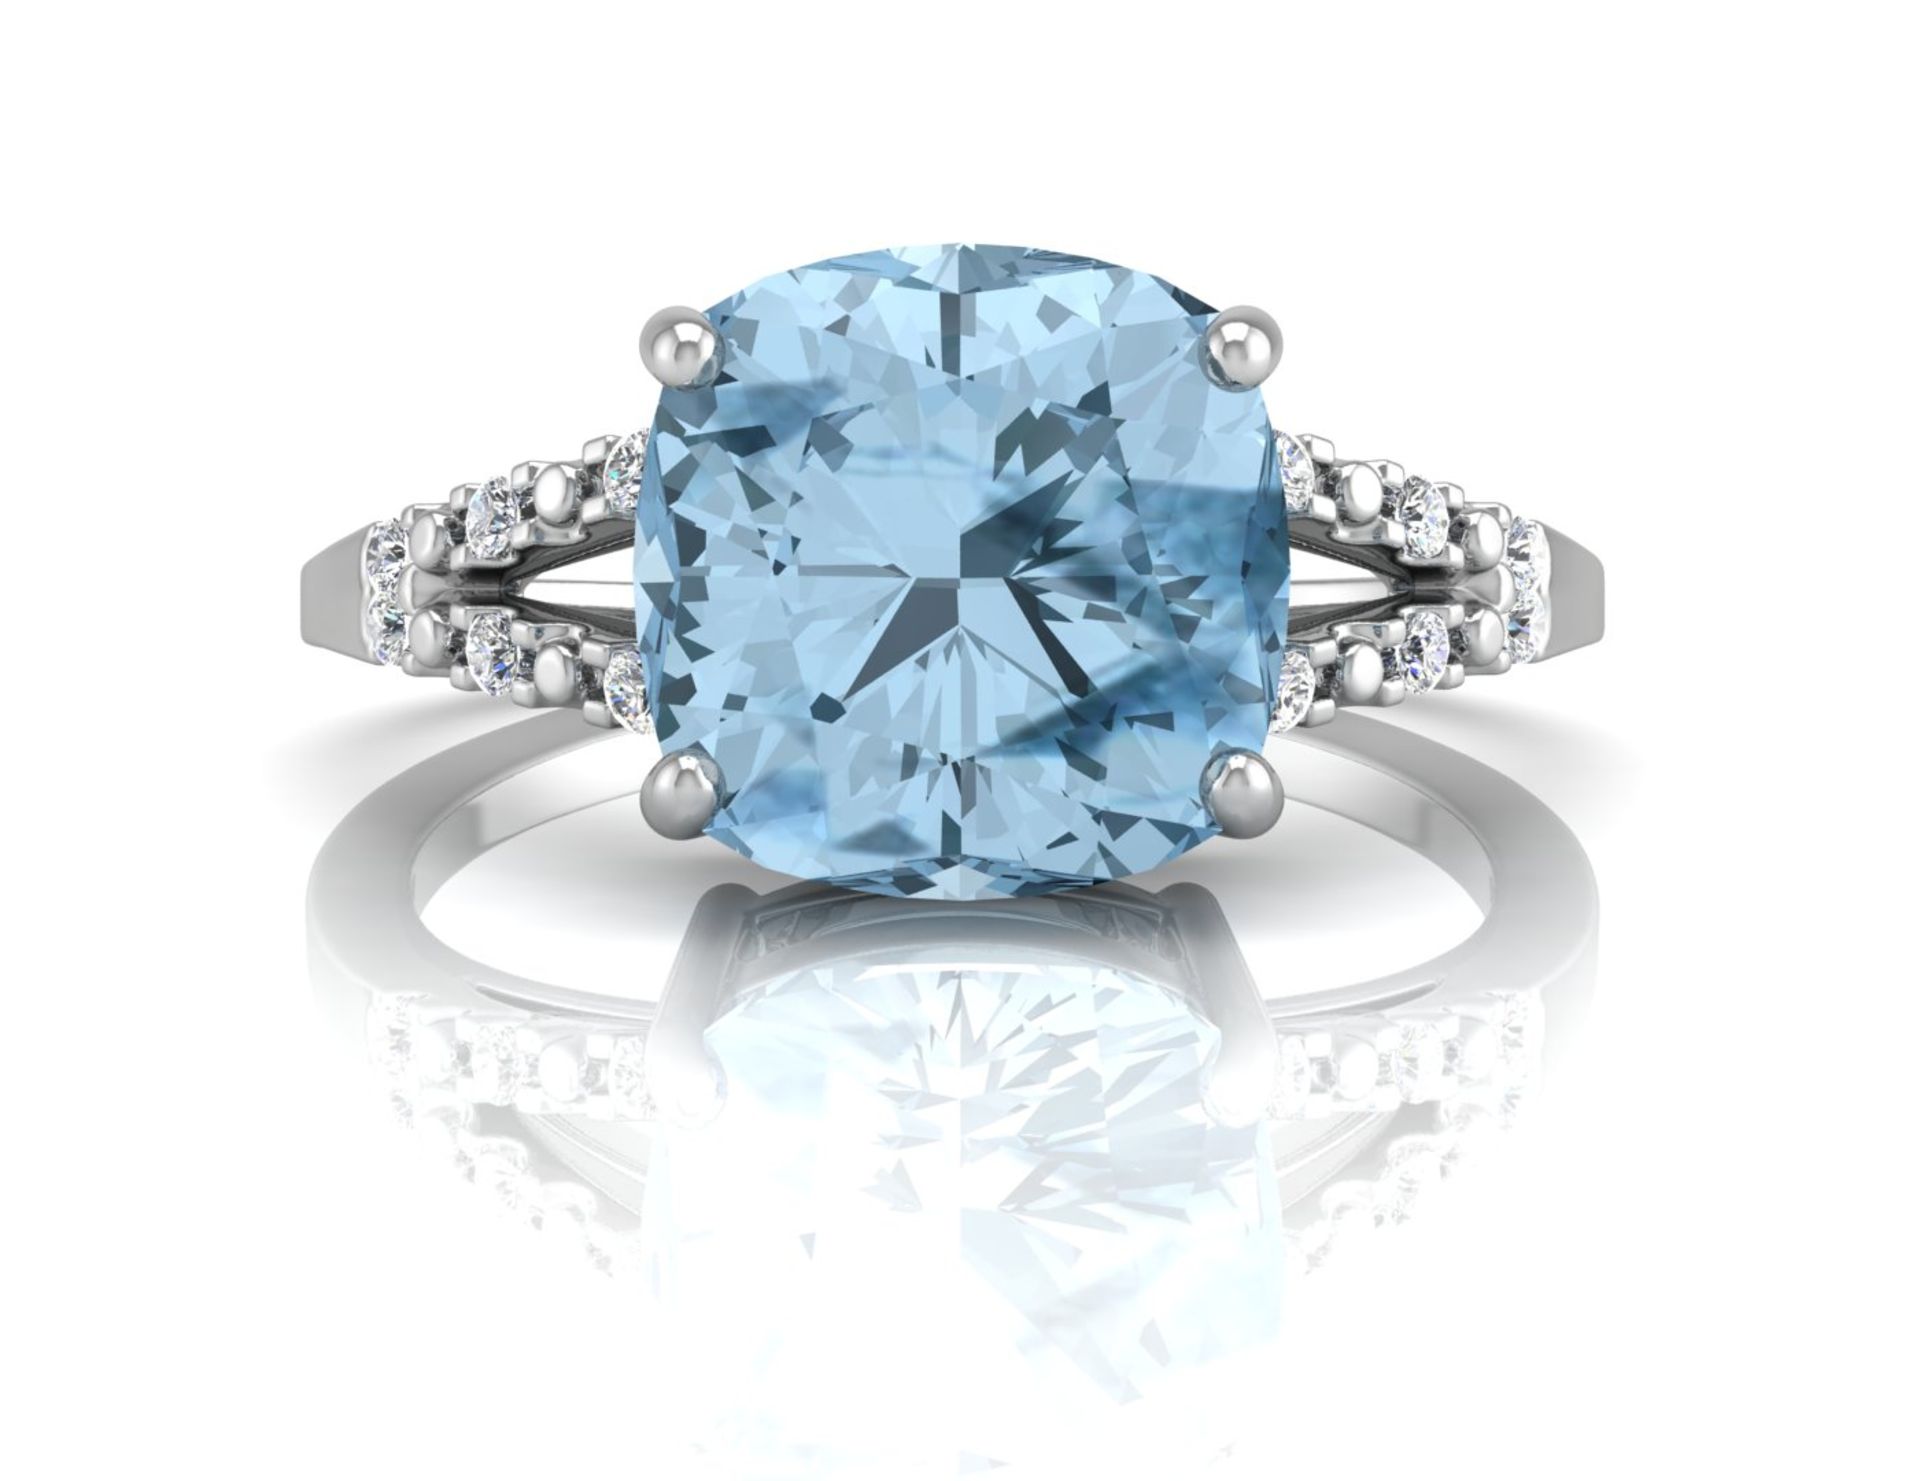 9ct White Gold Cushion Cut Blue Topaz With Diamond Set Shoulders Ring 0.06 Carats - Image 4 of 5